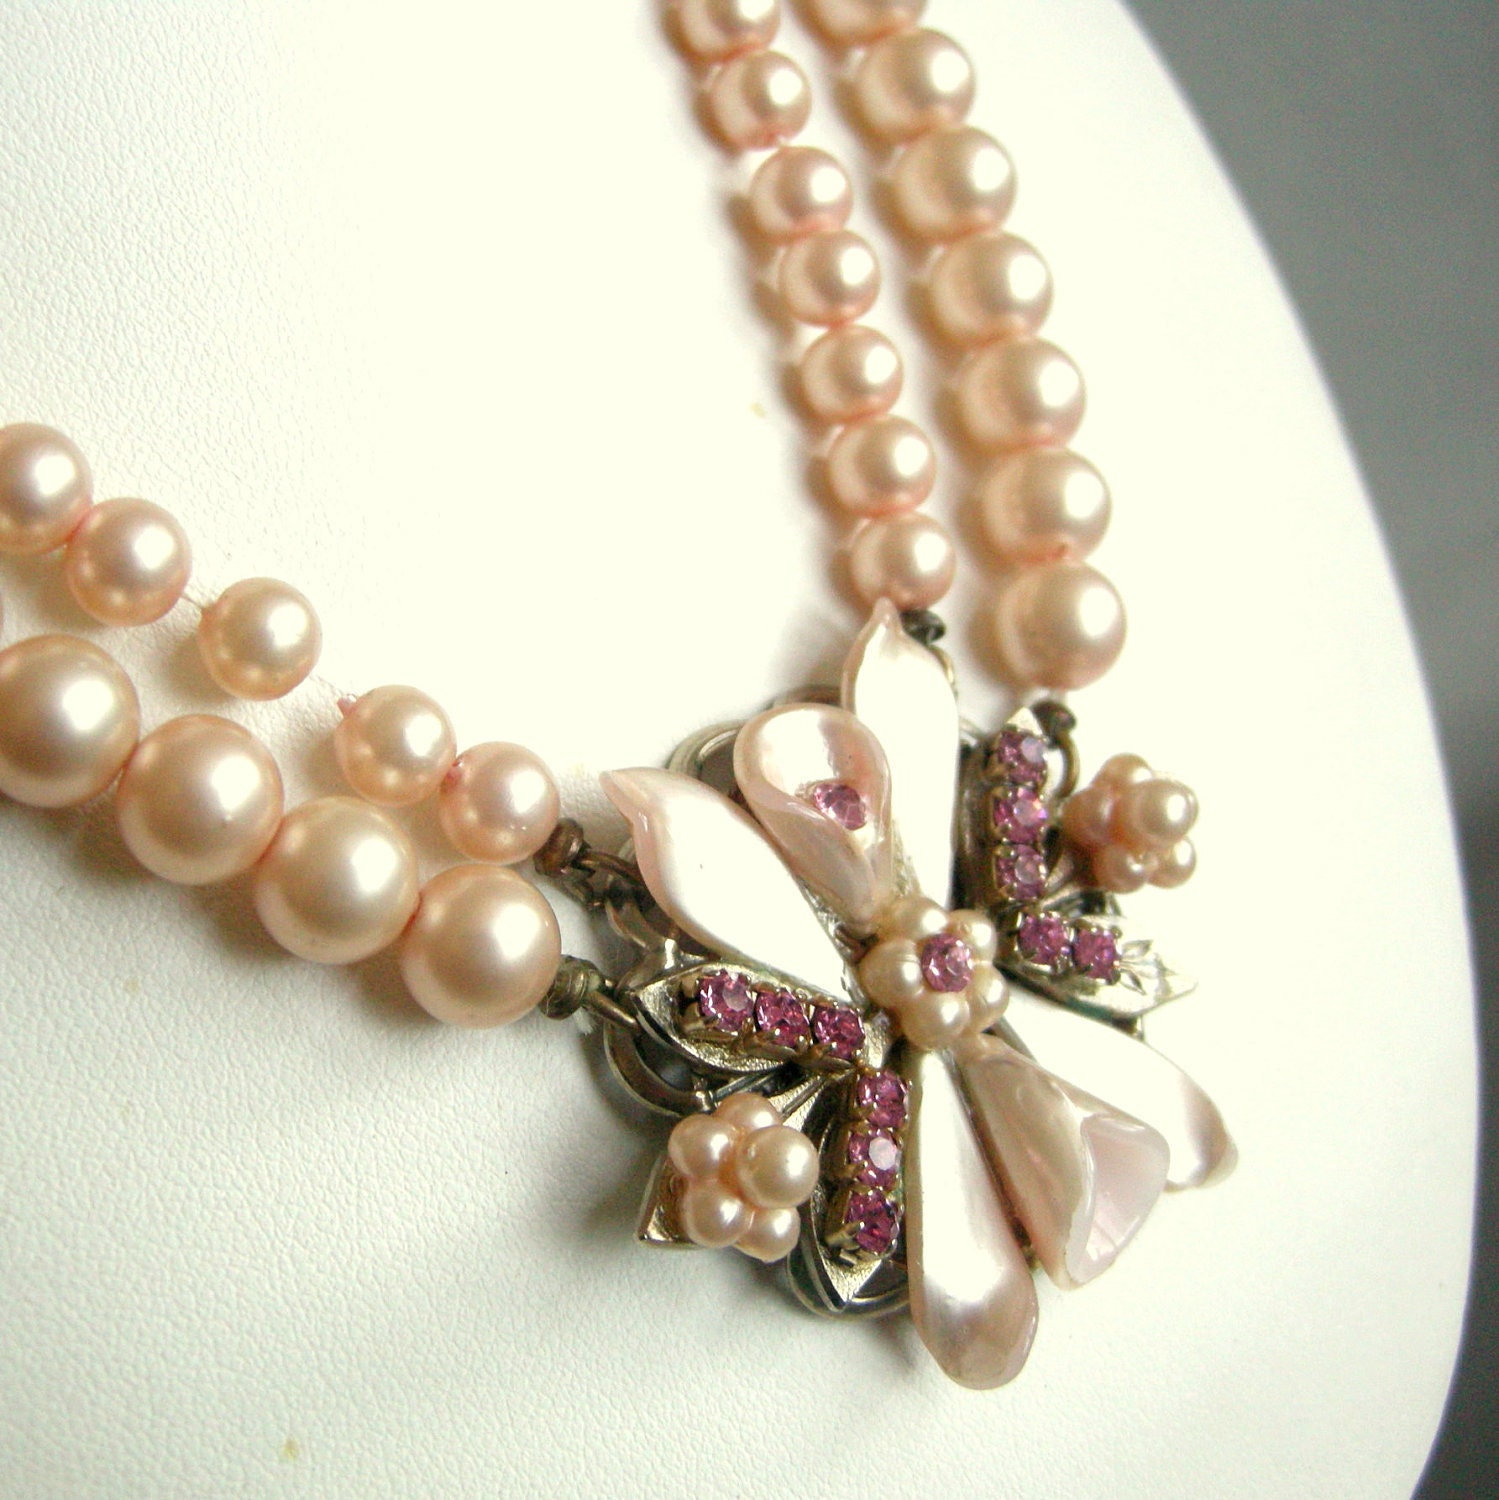 Vintage Coro double strand faux pearl necklace with floral